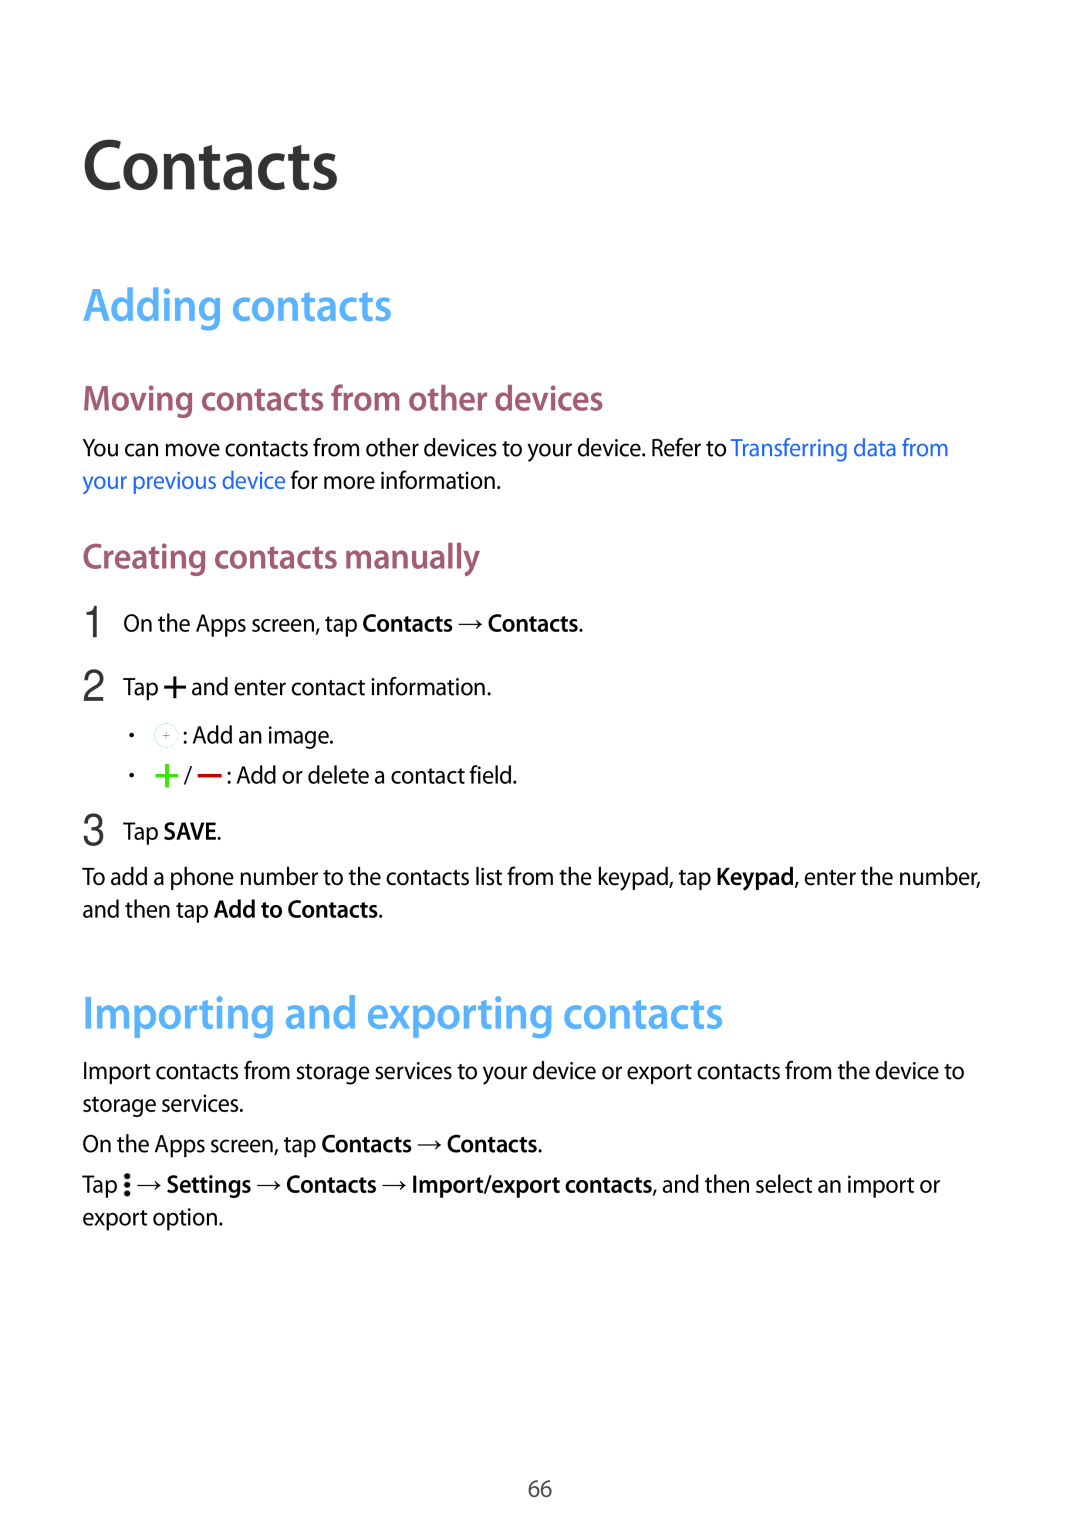 Samsung SM-A700FZWABGL Contacts, Adding contacts, Importing and exporting contacts, Moving contacts from other devices 